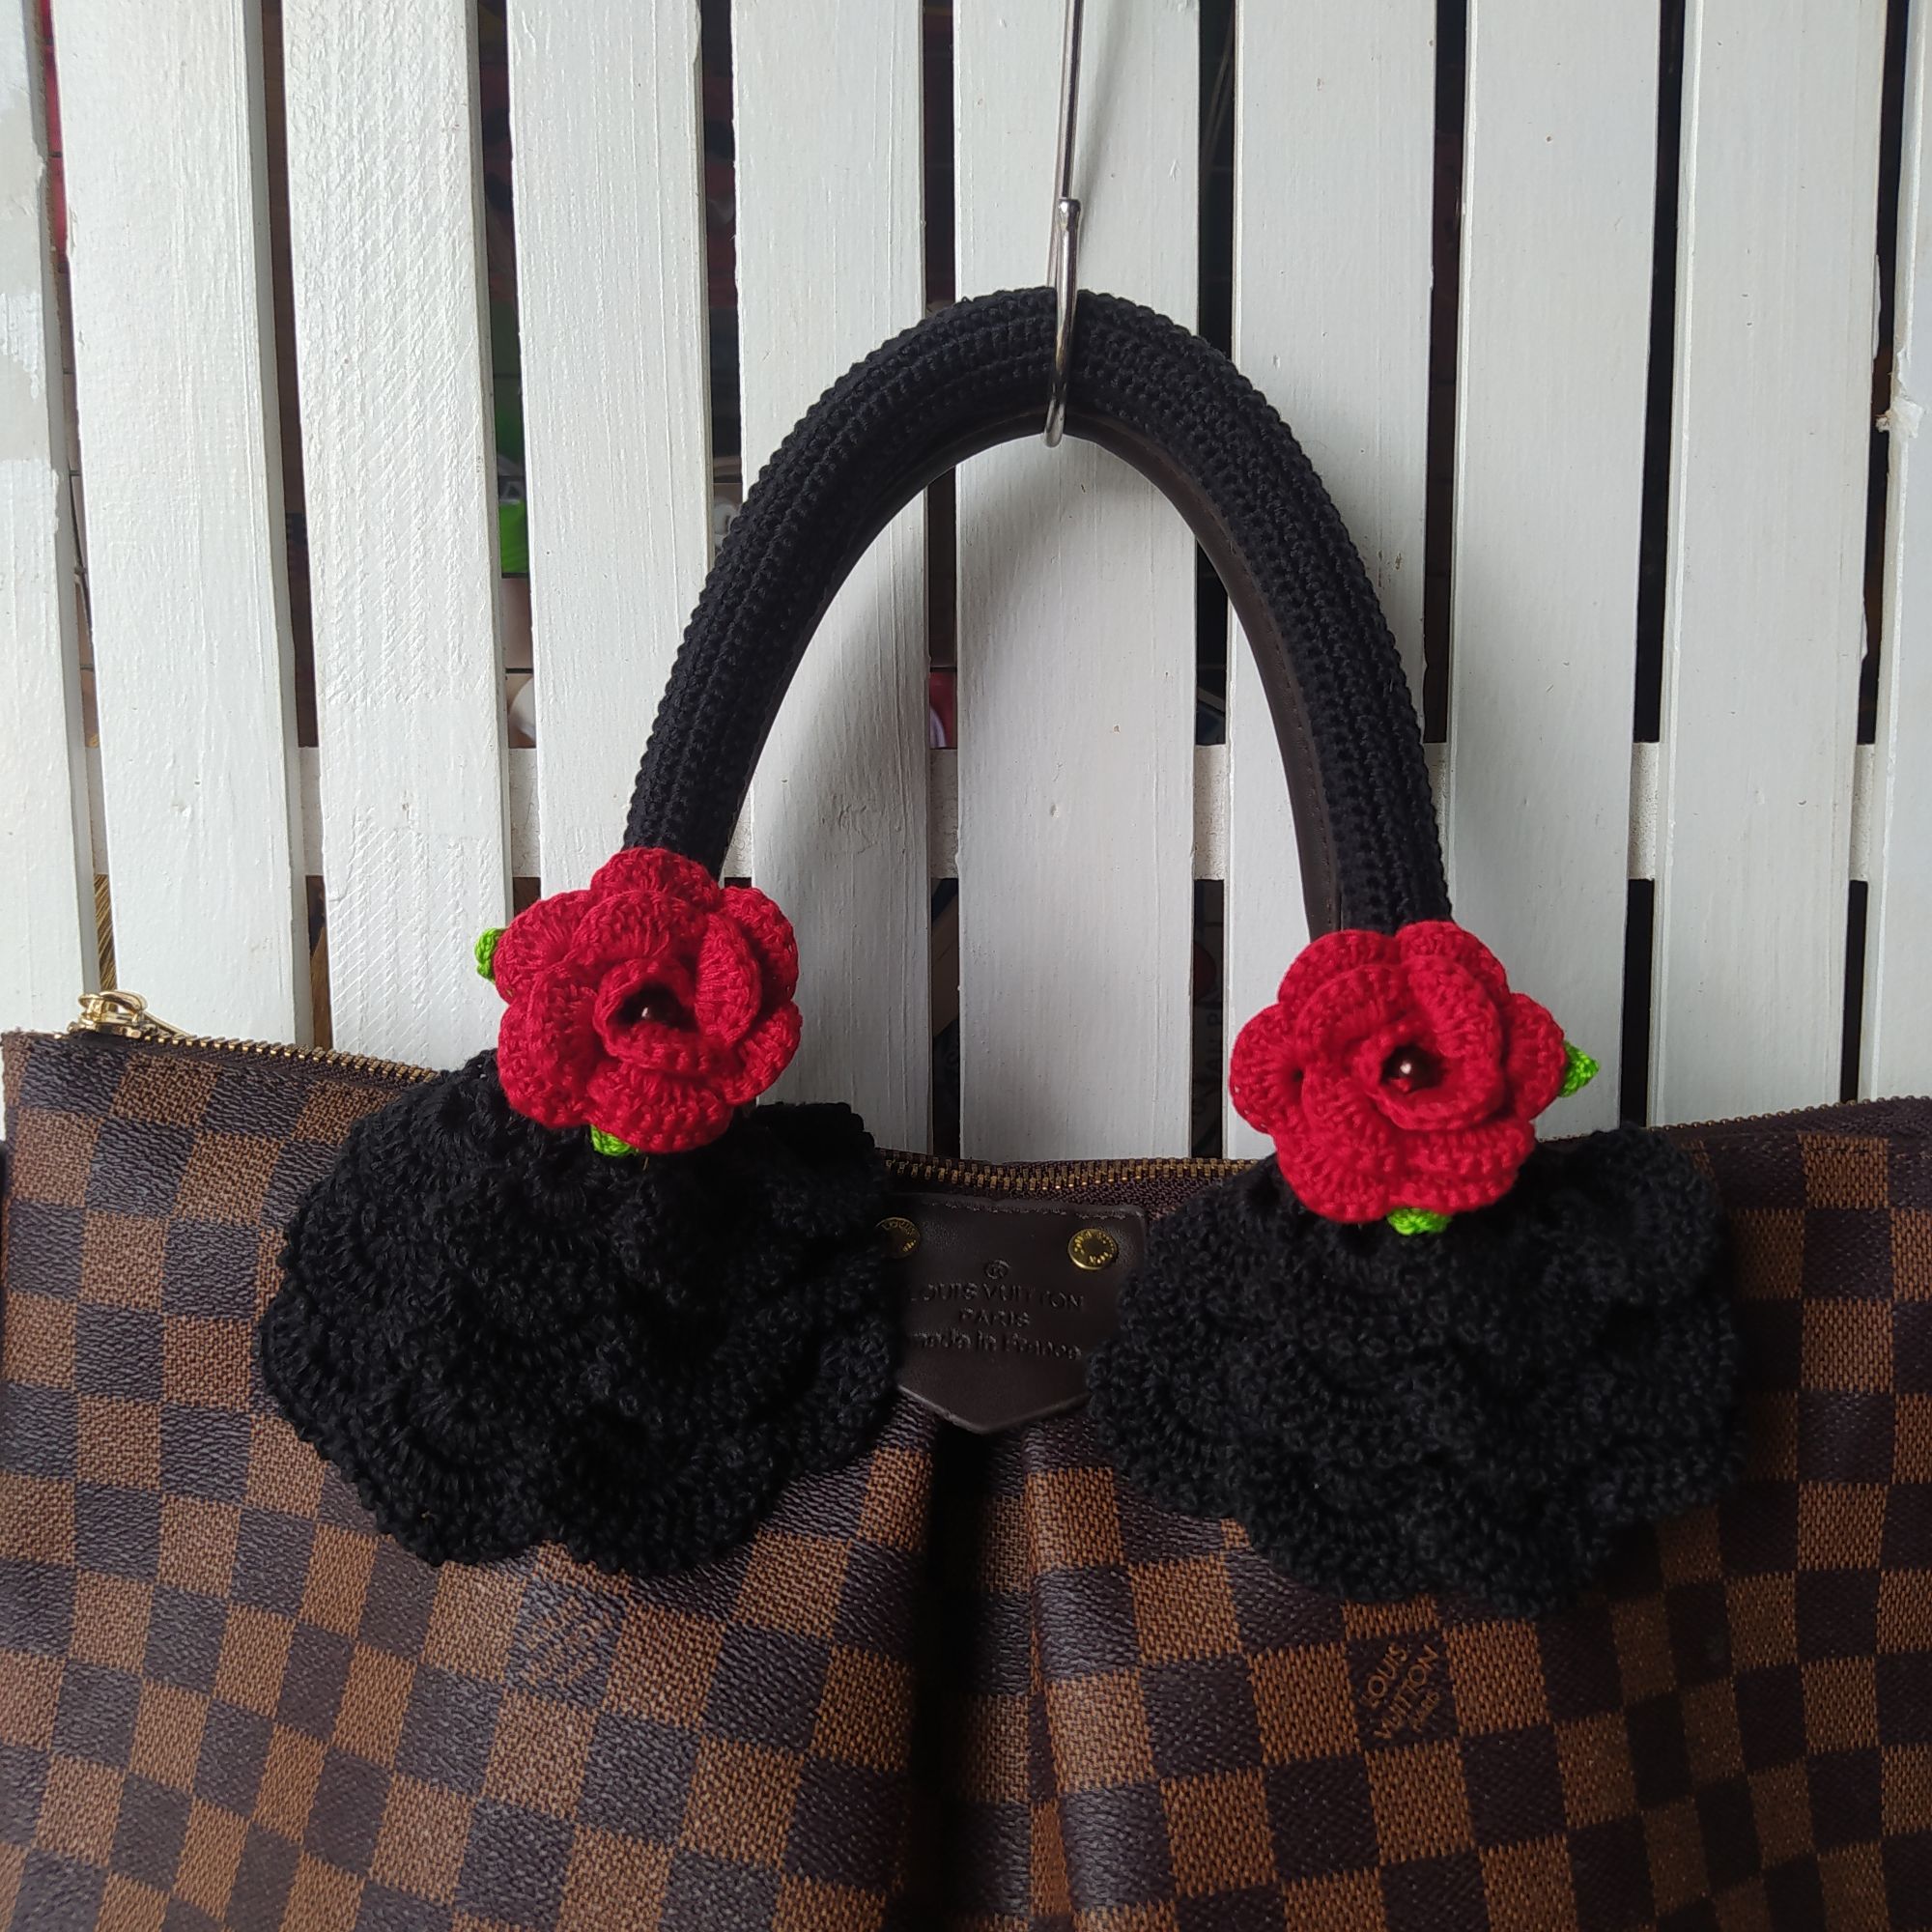 Crochet Handle Cover With Zipper for Louis Vuitton-speedy 